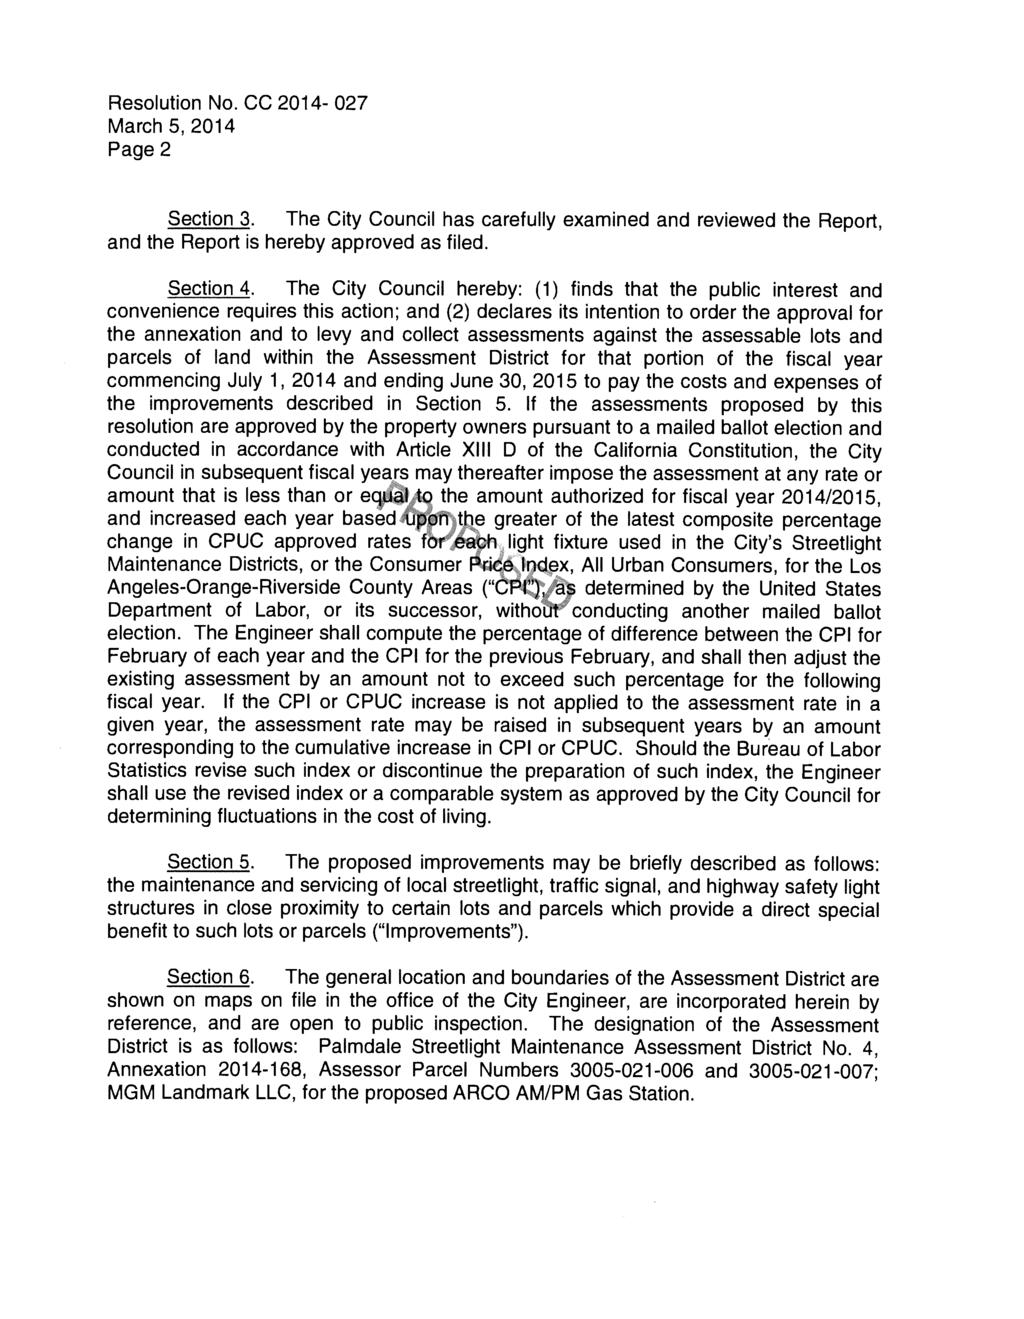 Resolution No. CC 2014-027 March 5, 2014 Page 2 Section 3. The City Council has carefully examined and reviewed the Report, and the Report is hereby approved as filed. Section 4.